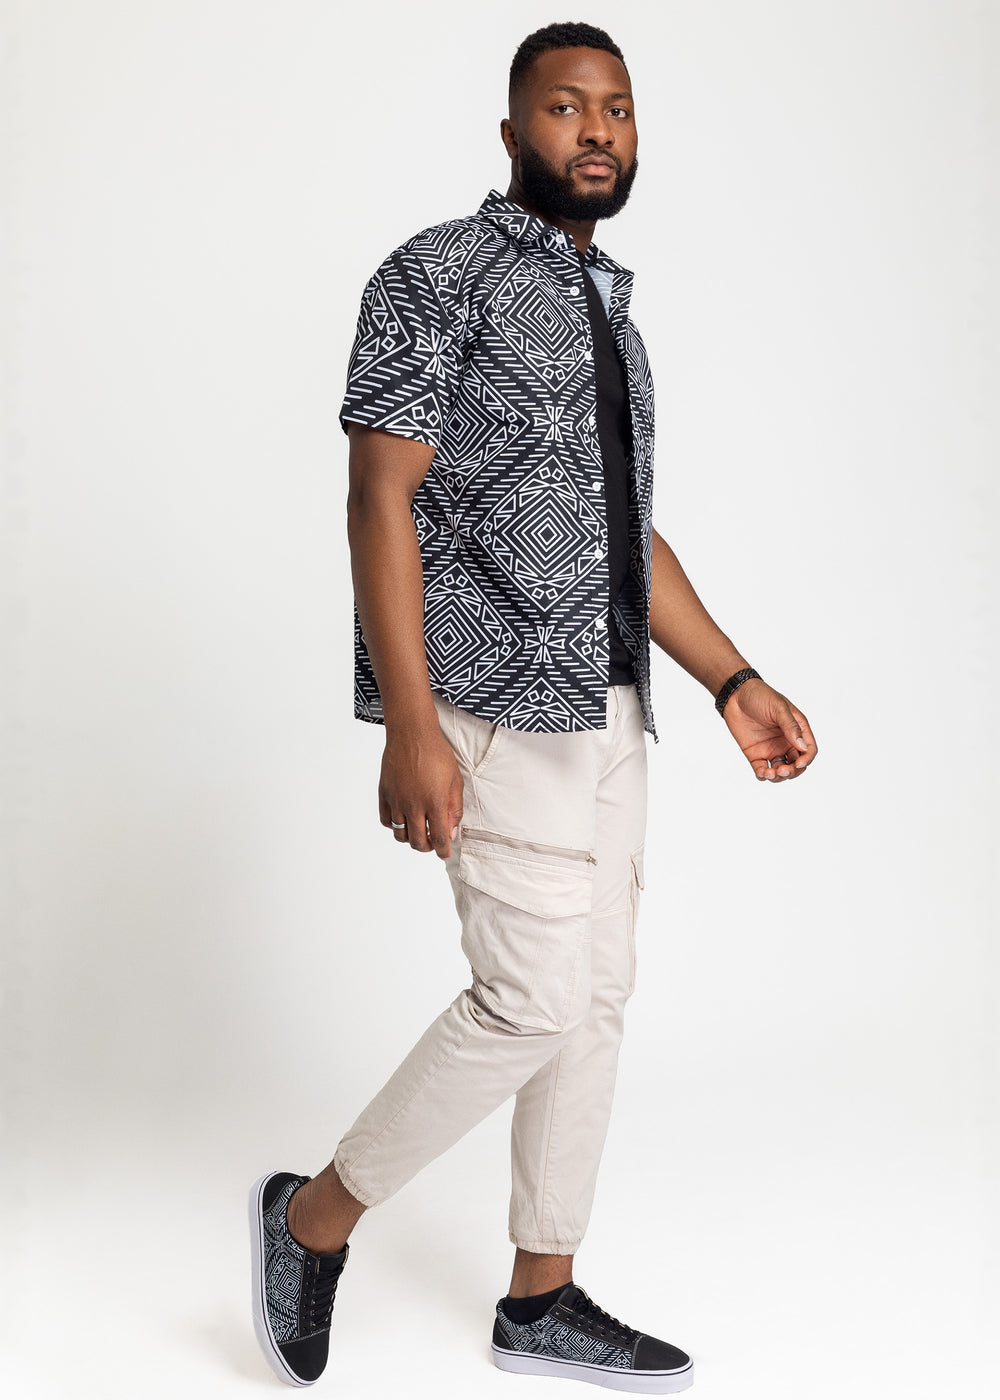 African print inspired fashion | African Apparel Store | Osenoir